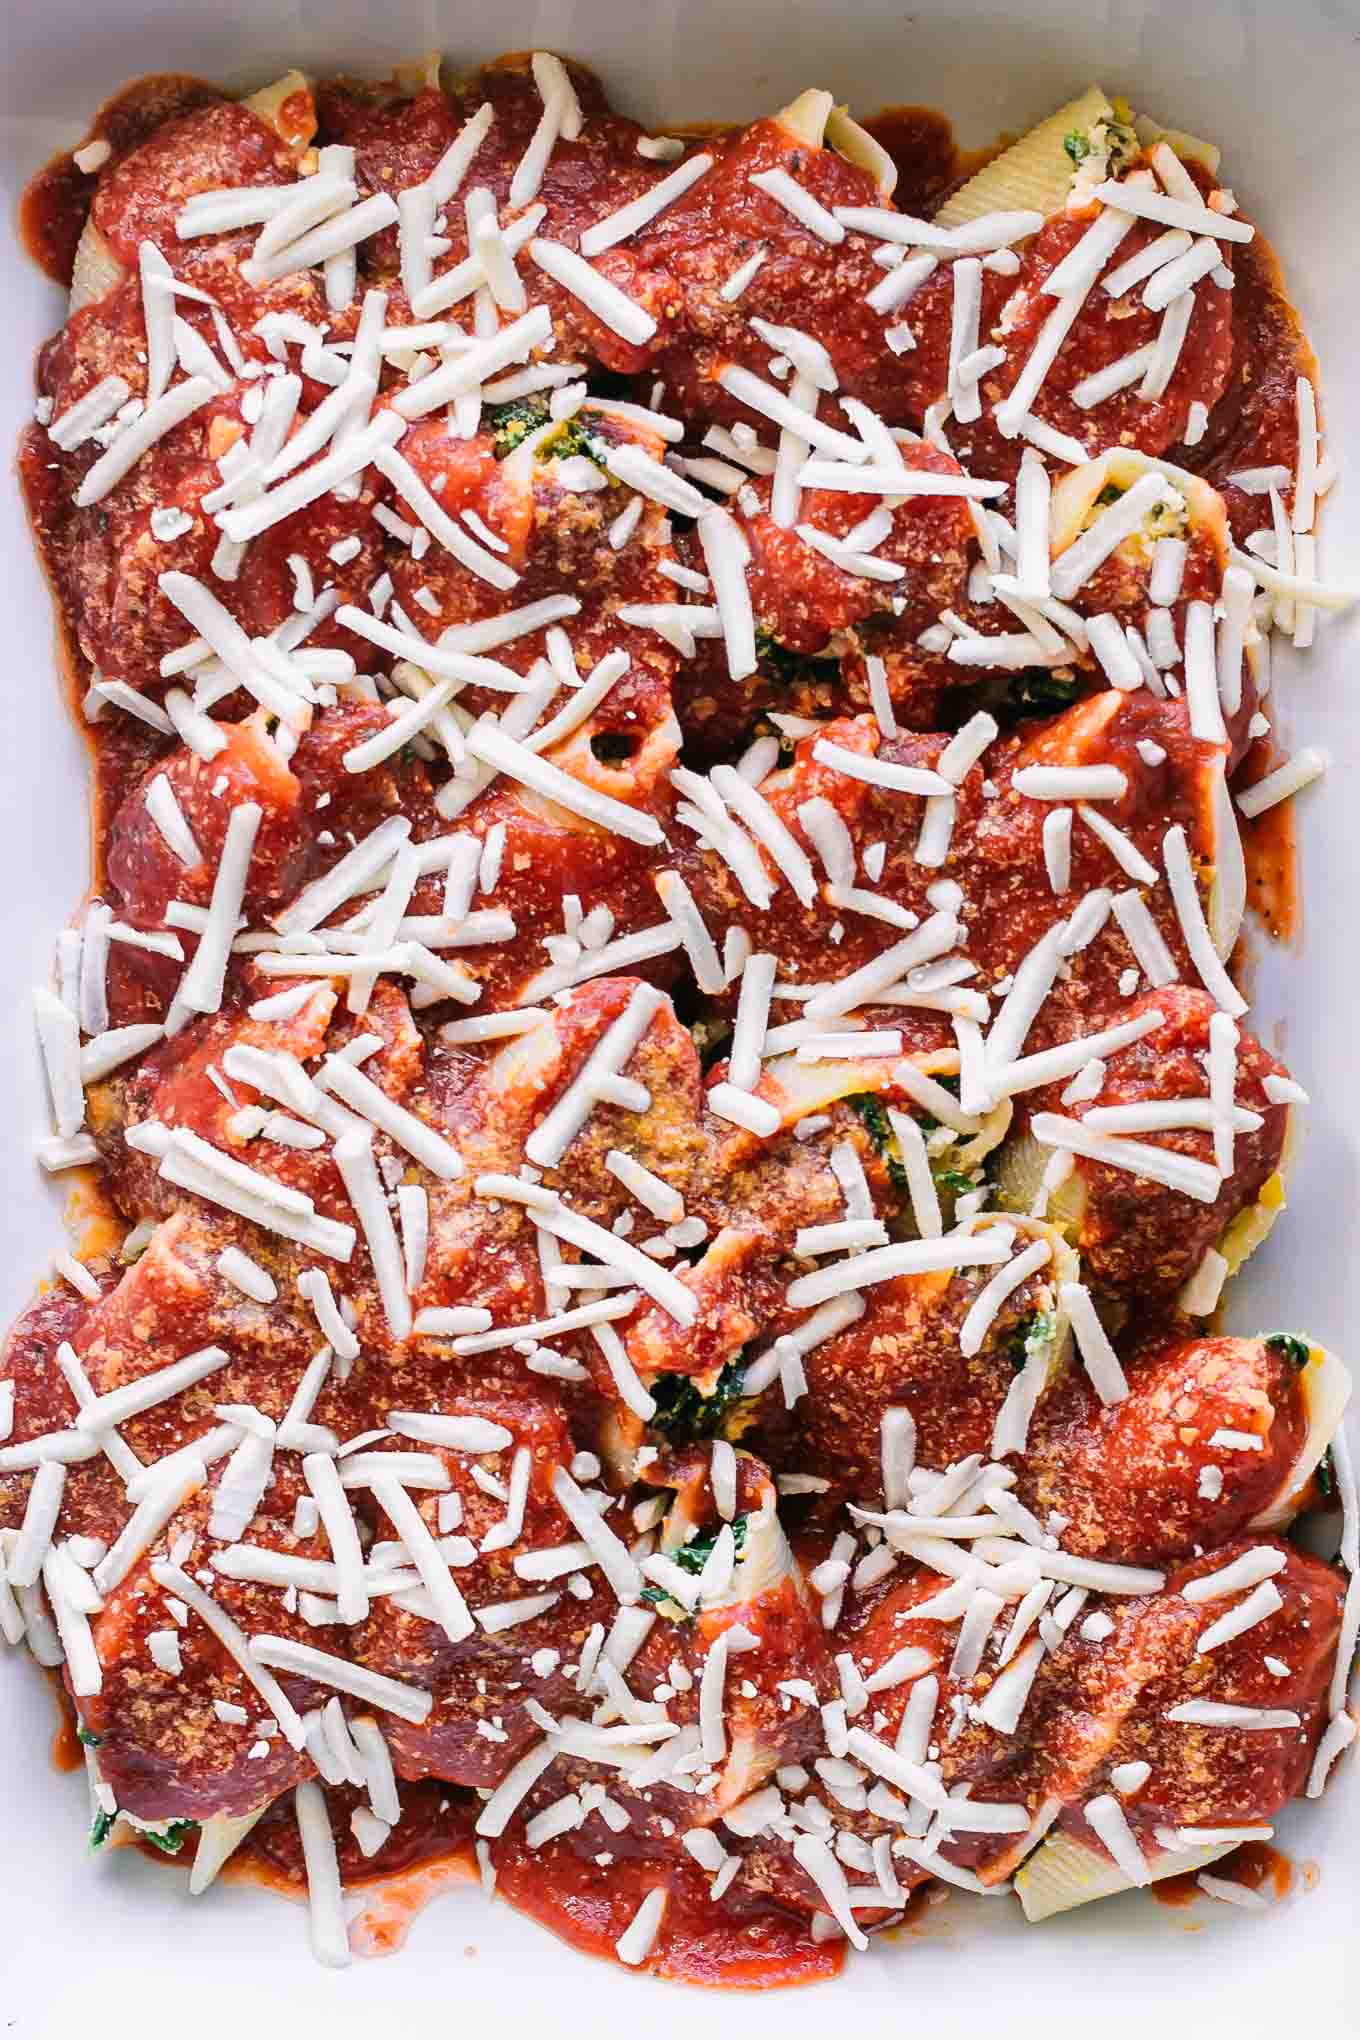 jumbo pasta shells stuffed with plant-based ricotta and spinach and topped with tomato sauce and cheese in a white baking dish